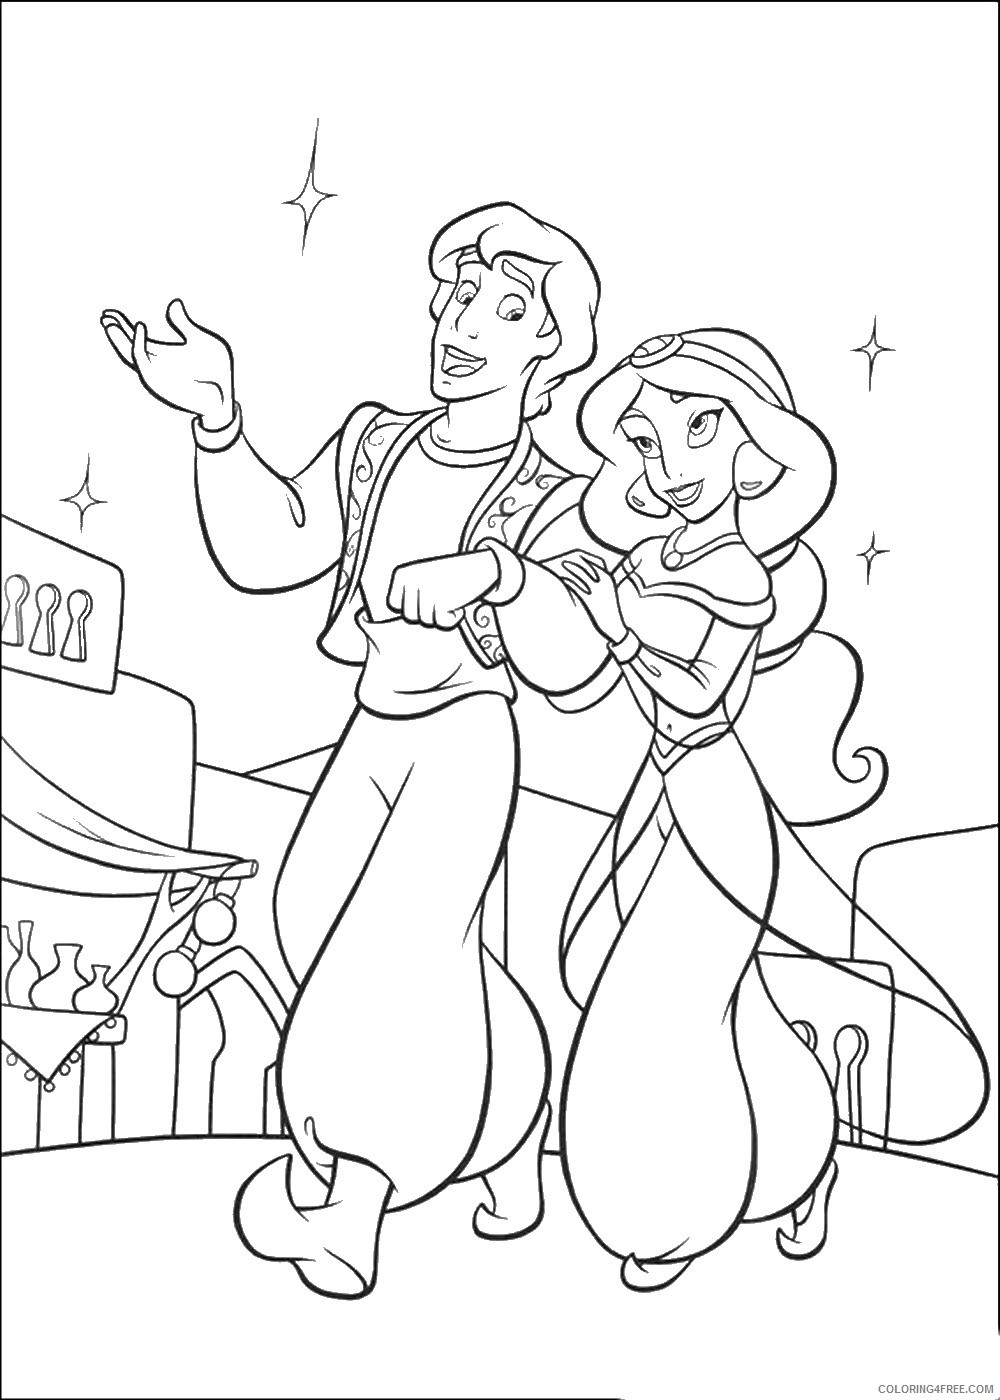 Aladdin Coloring Pages Cartoons aladdin_01 Printable 2020 0281 Coloring4free